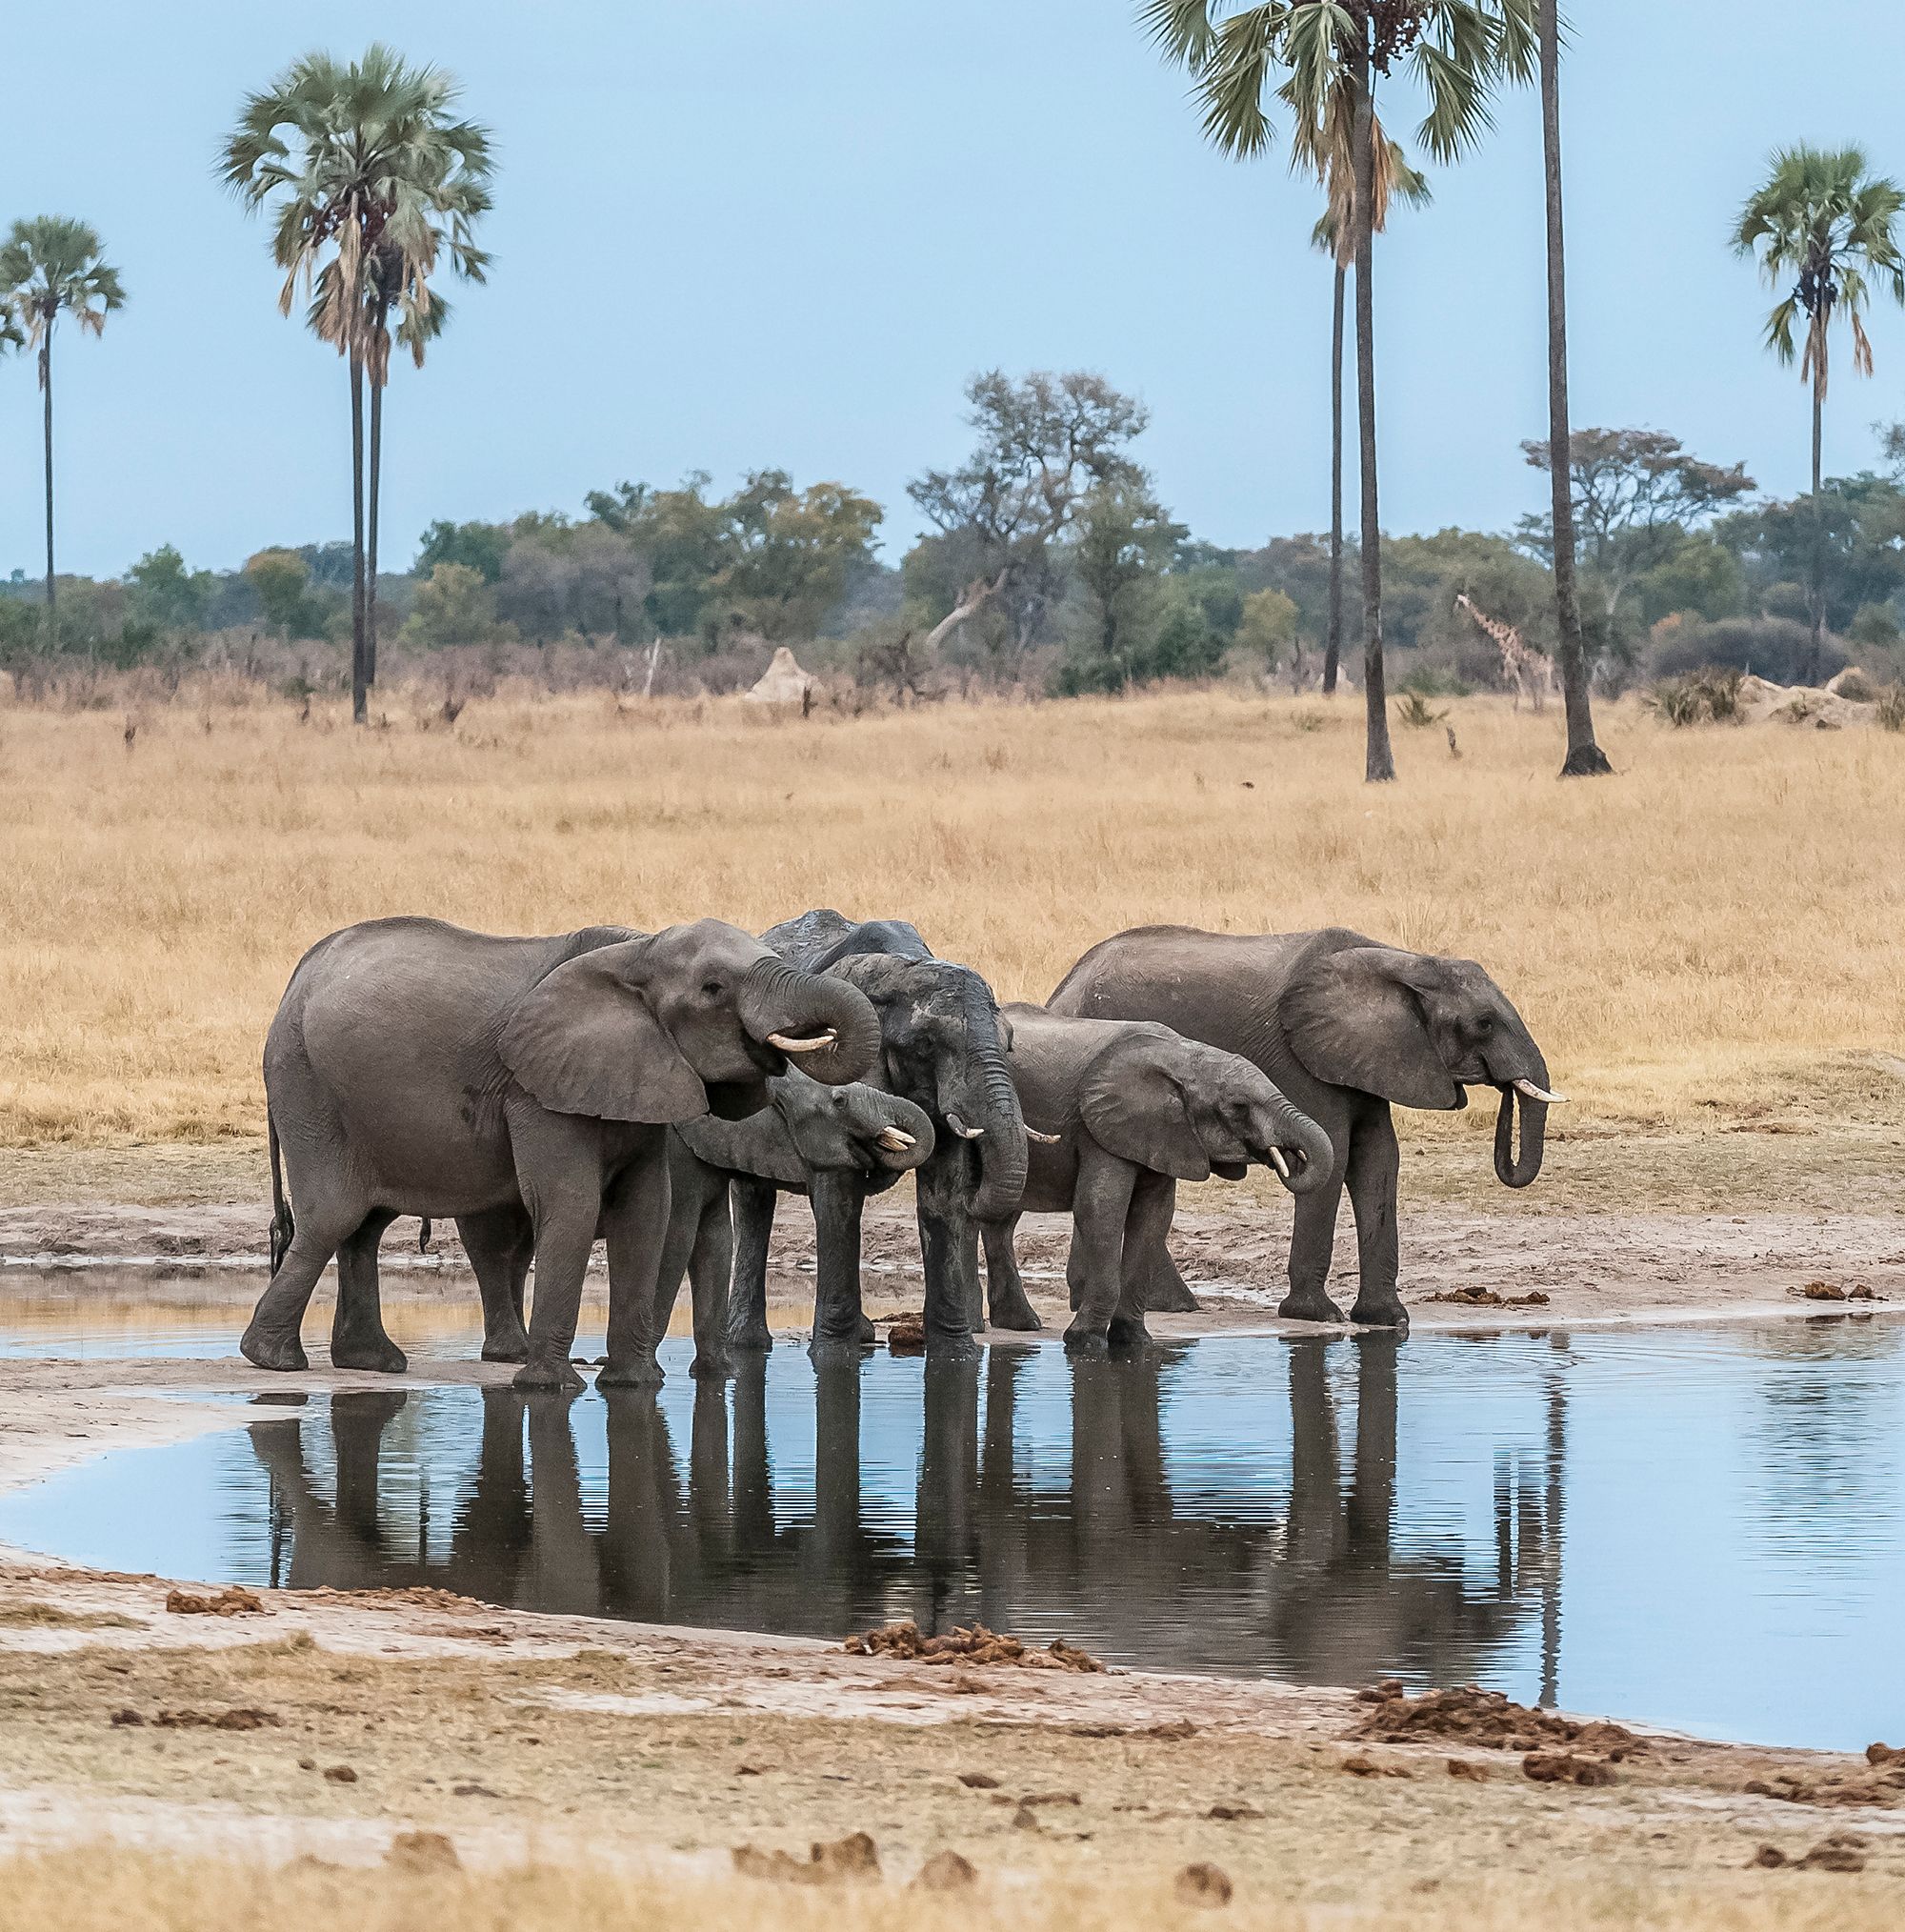 Elephants gather at the water. Photo / Mike Myers